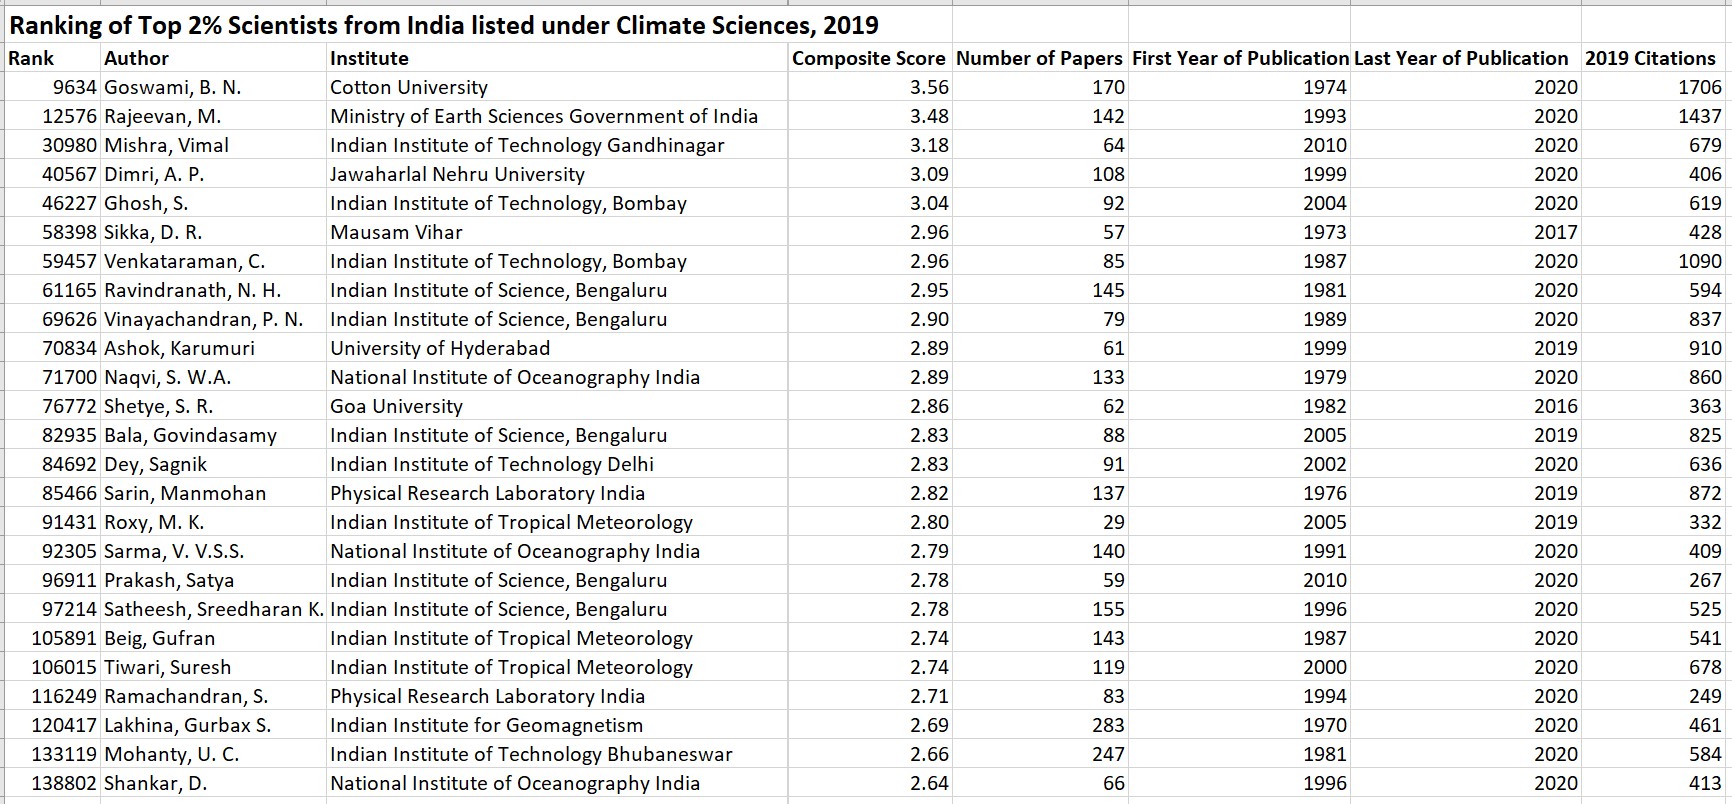 Top 2% scientists based on Stanford index published in Plos, for India 2019